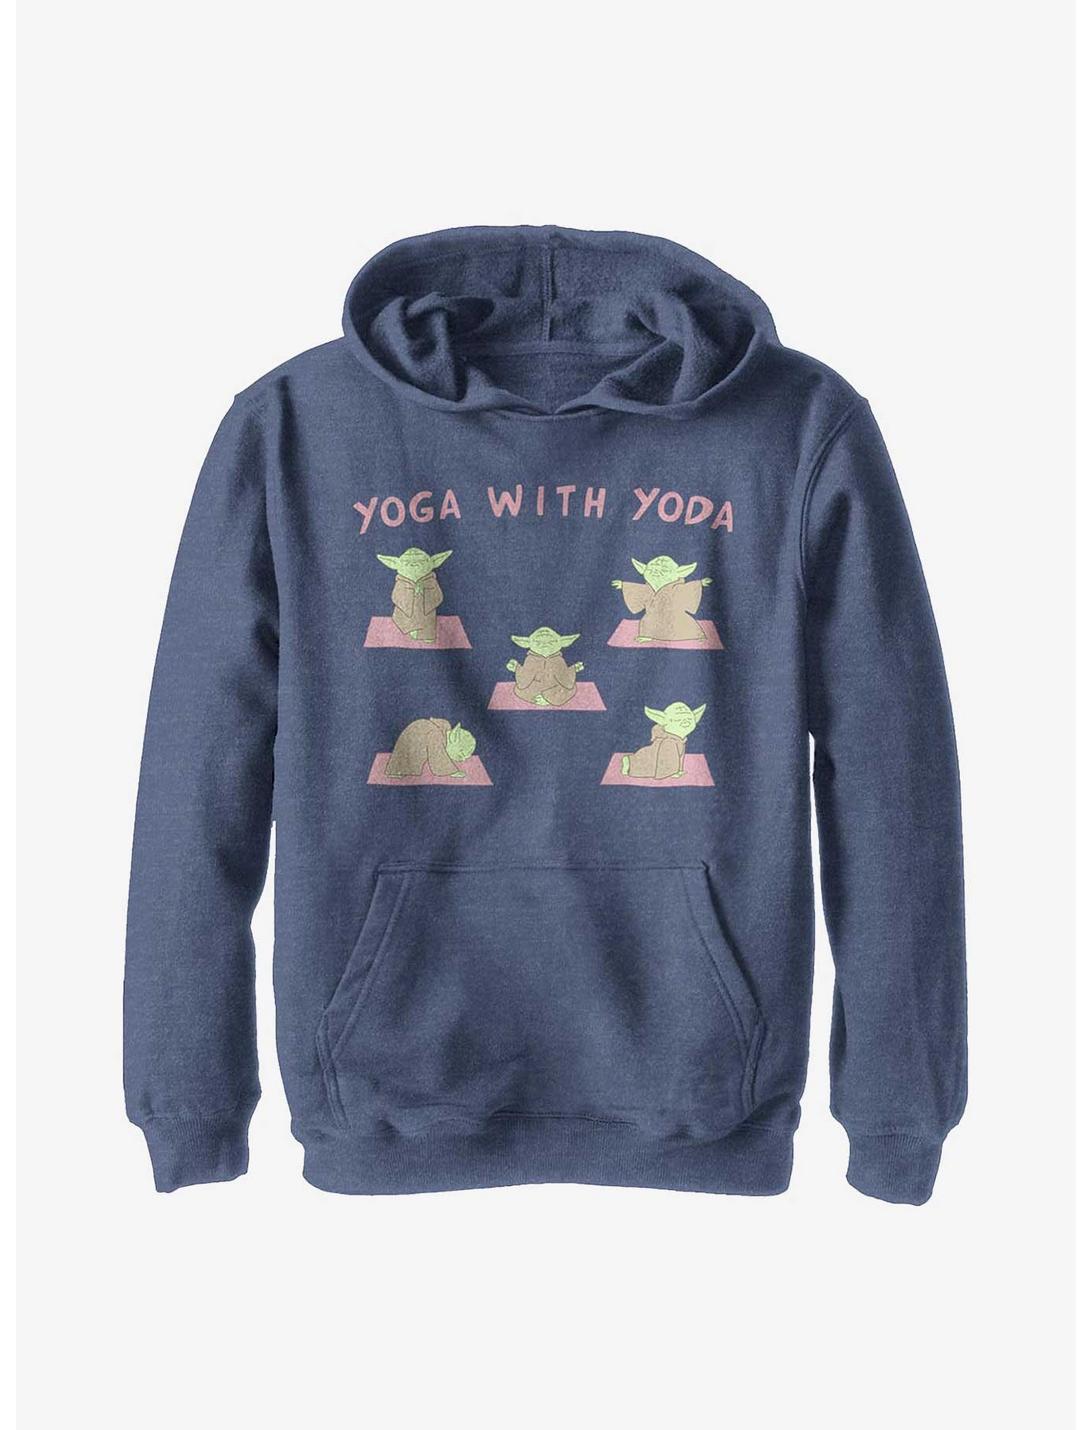 Star Wars Yoga With Yoda Youth Hoodie, NAVY HTR, hi-res